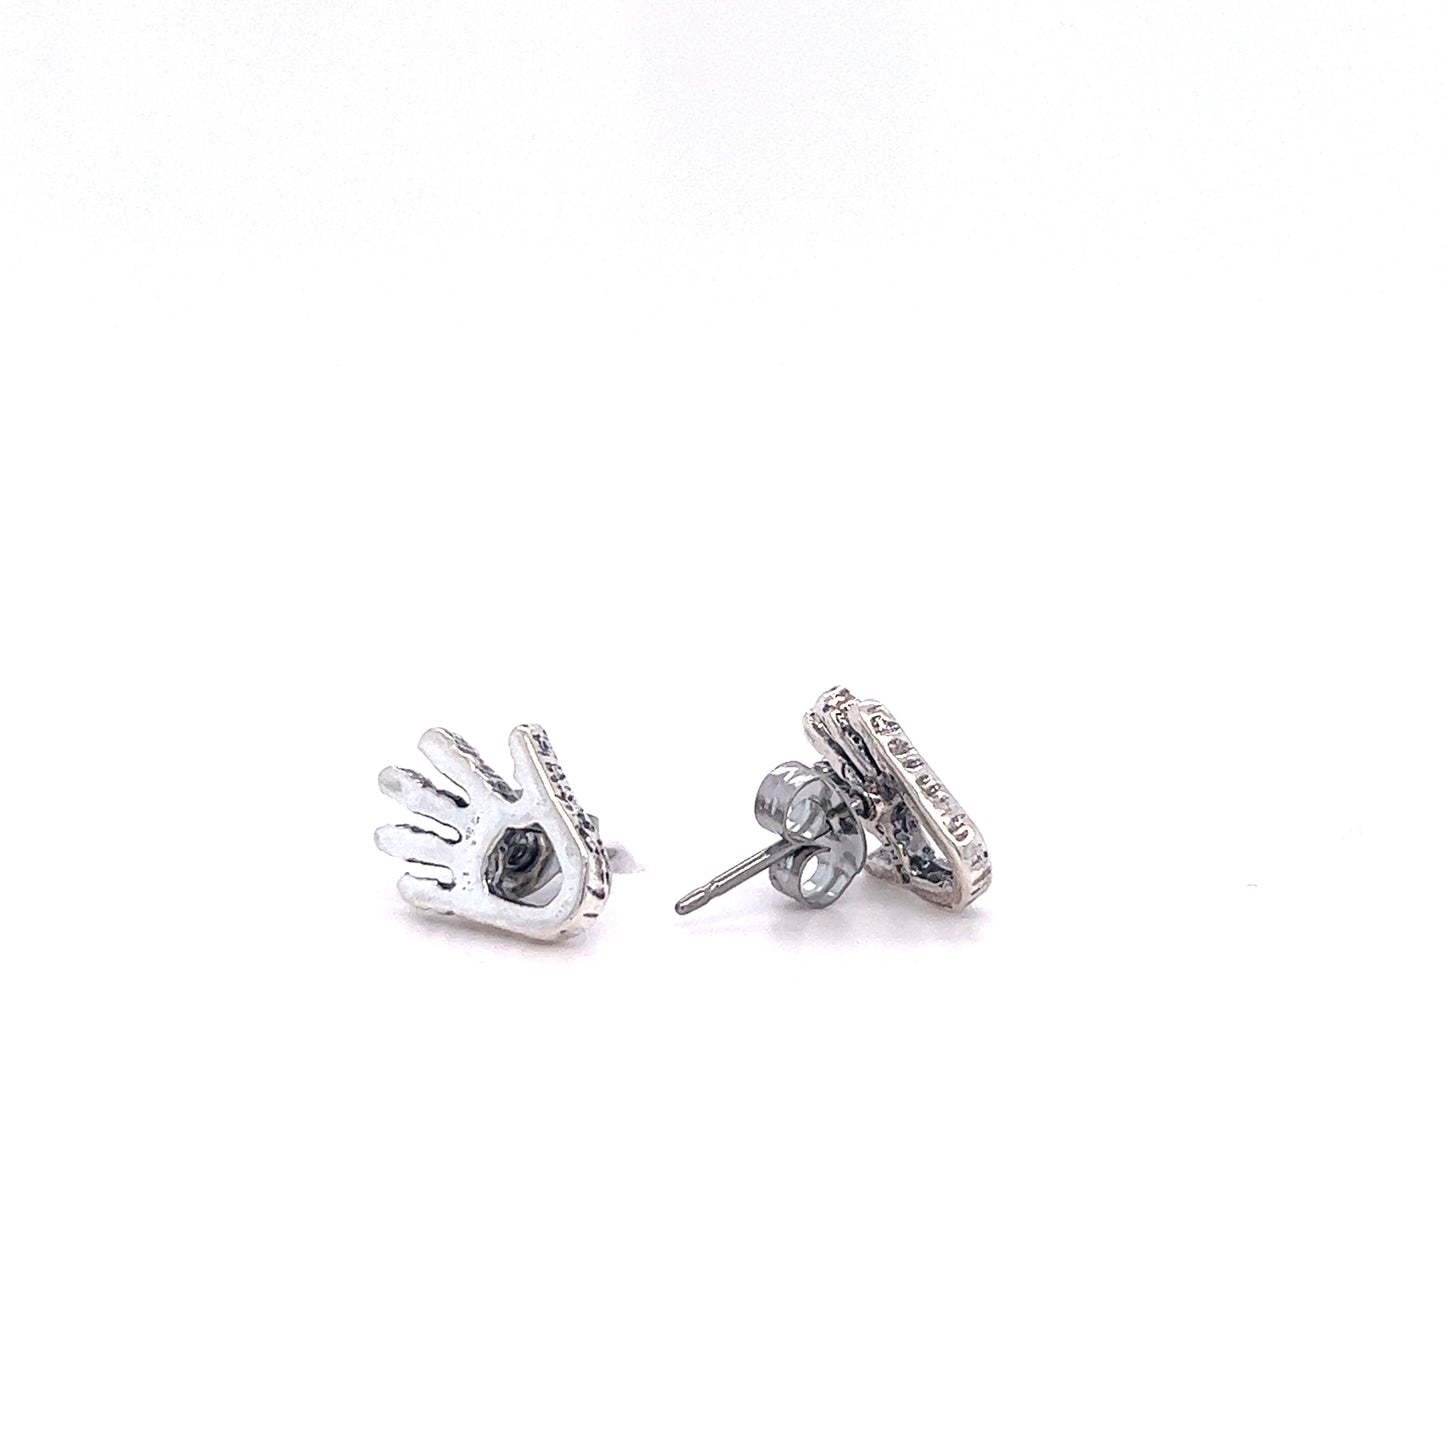 A pair of Super Silver Petroglyph Hand Studs, showcasing an intricate hand petroglyph design that pays homage to the ancient Anasazi people and their beliefs in helping and healing.